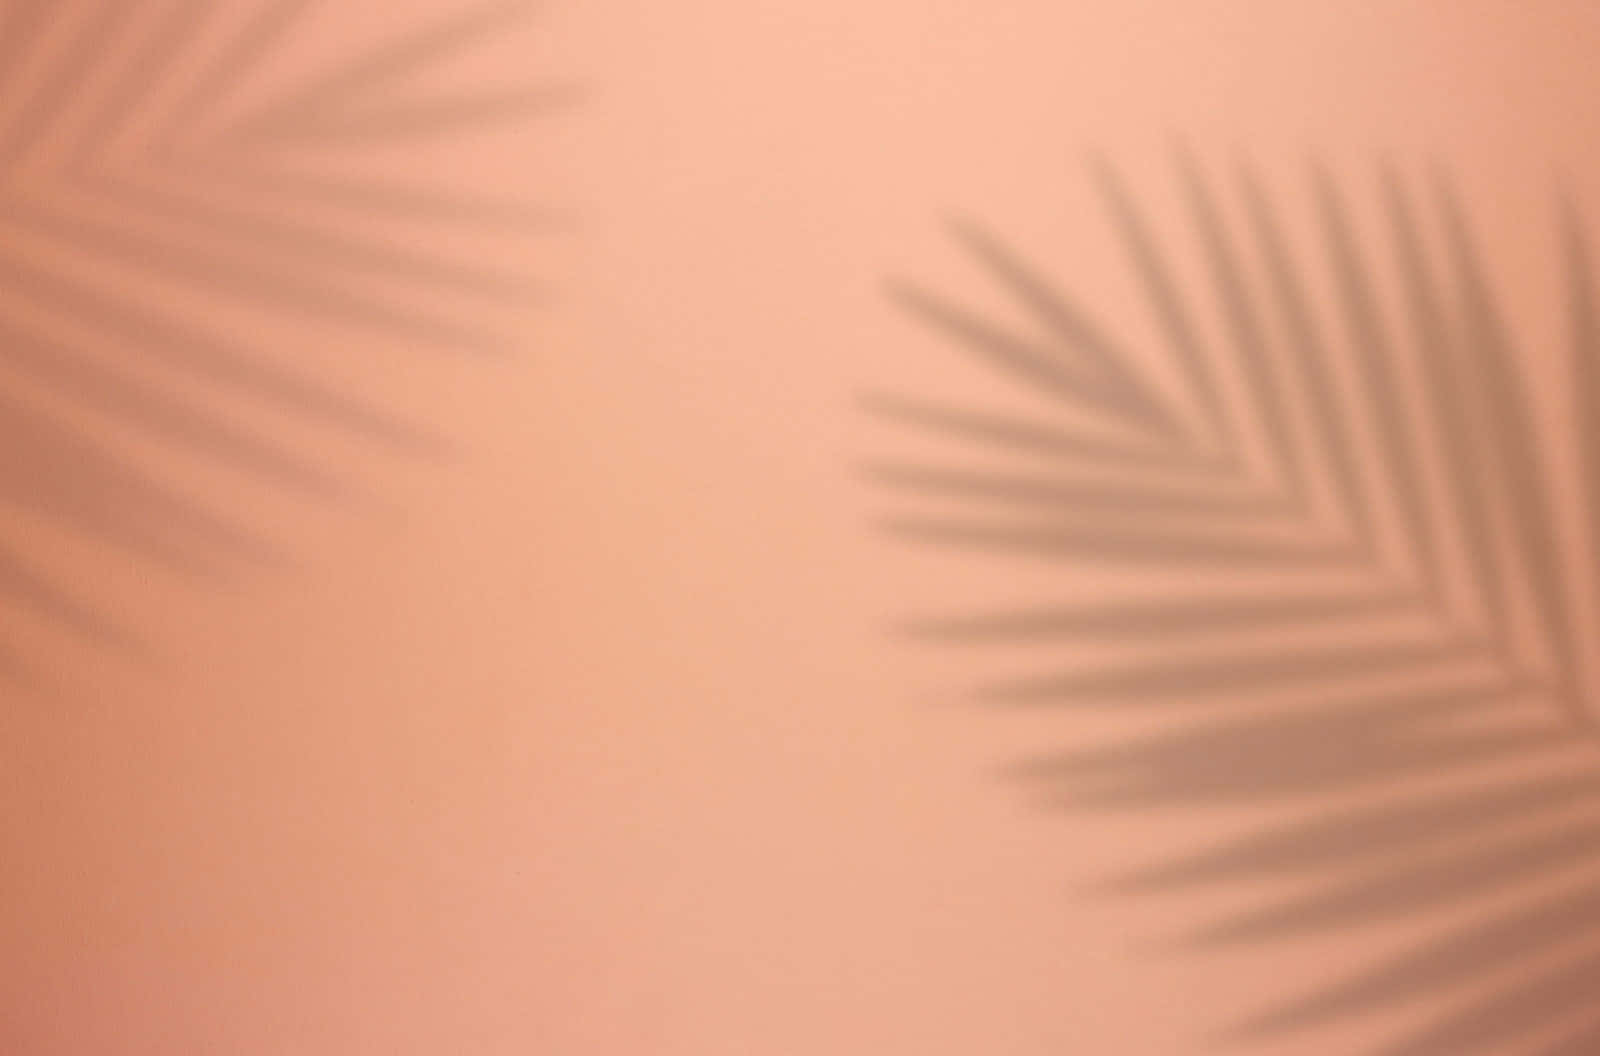 A Shadow Of Palm Leaves On A Pink Background